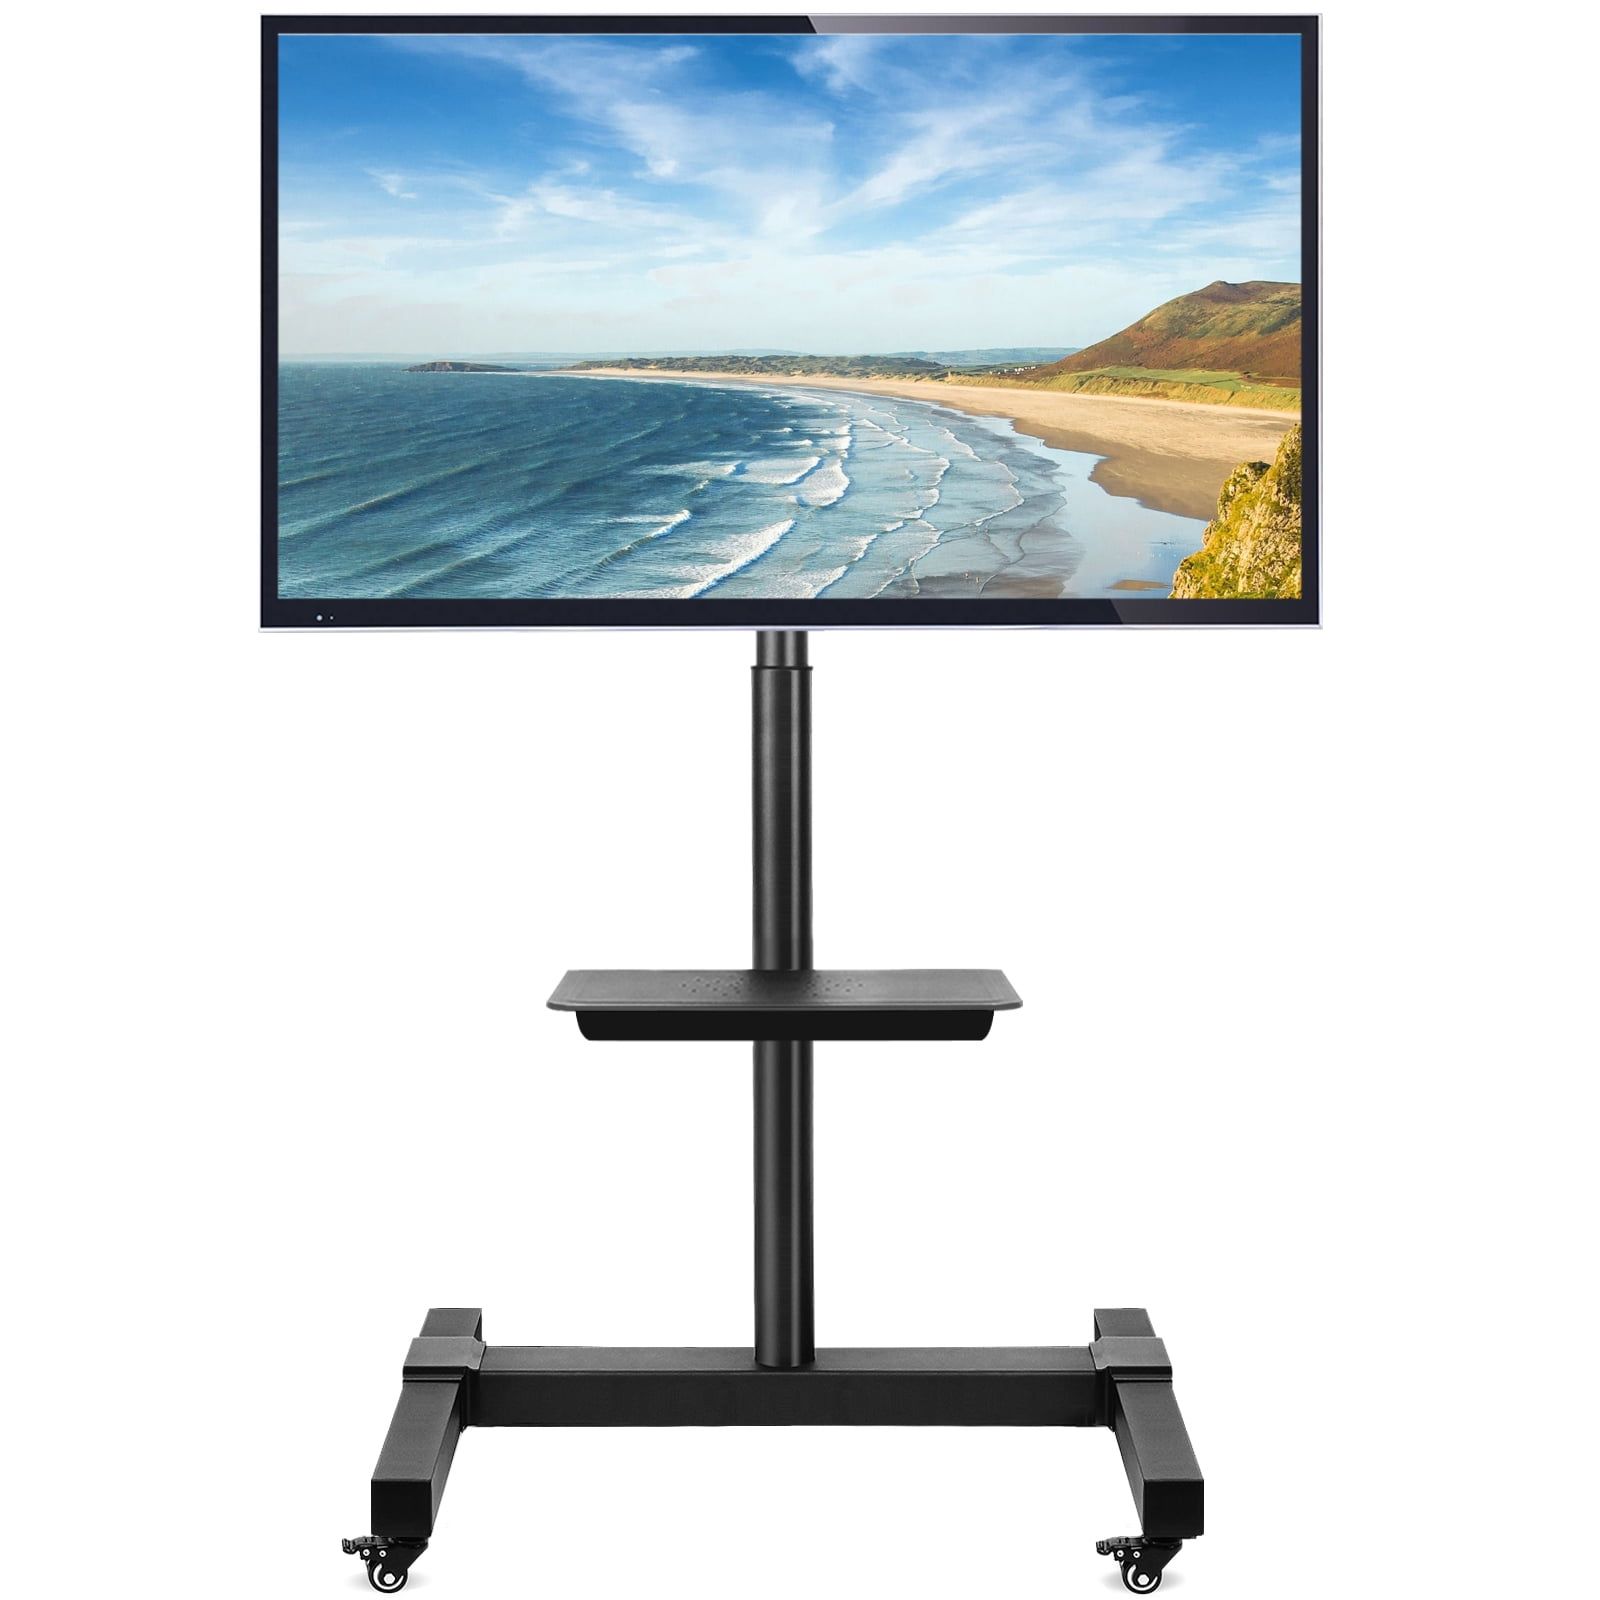 Mobile Tv Stand Tilt Rolling Tv Cart With Wheels For Lcd Led Tvs Up To 70  Inch, Black – Walmart Pertaining To Mobile Tilt Rolling Tv Stands (View 2 of 15)